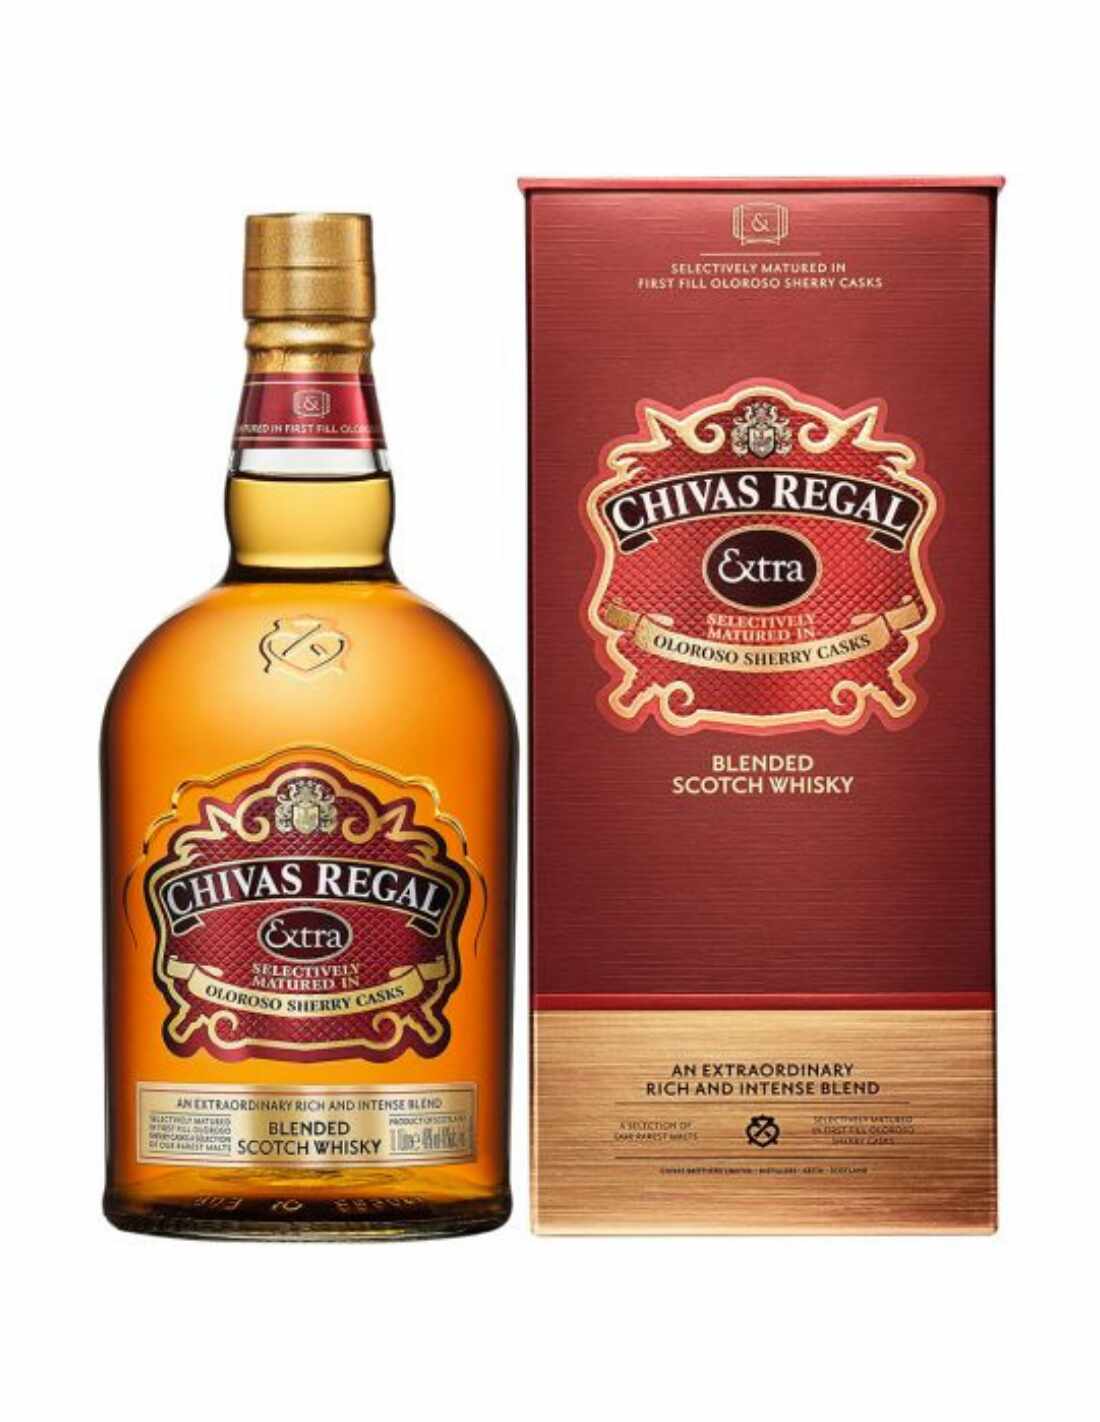 Whisky Chivas Regal 13 Years Extra Oloroso Sherry Cask, 0.7L, 40% alc., Scotia